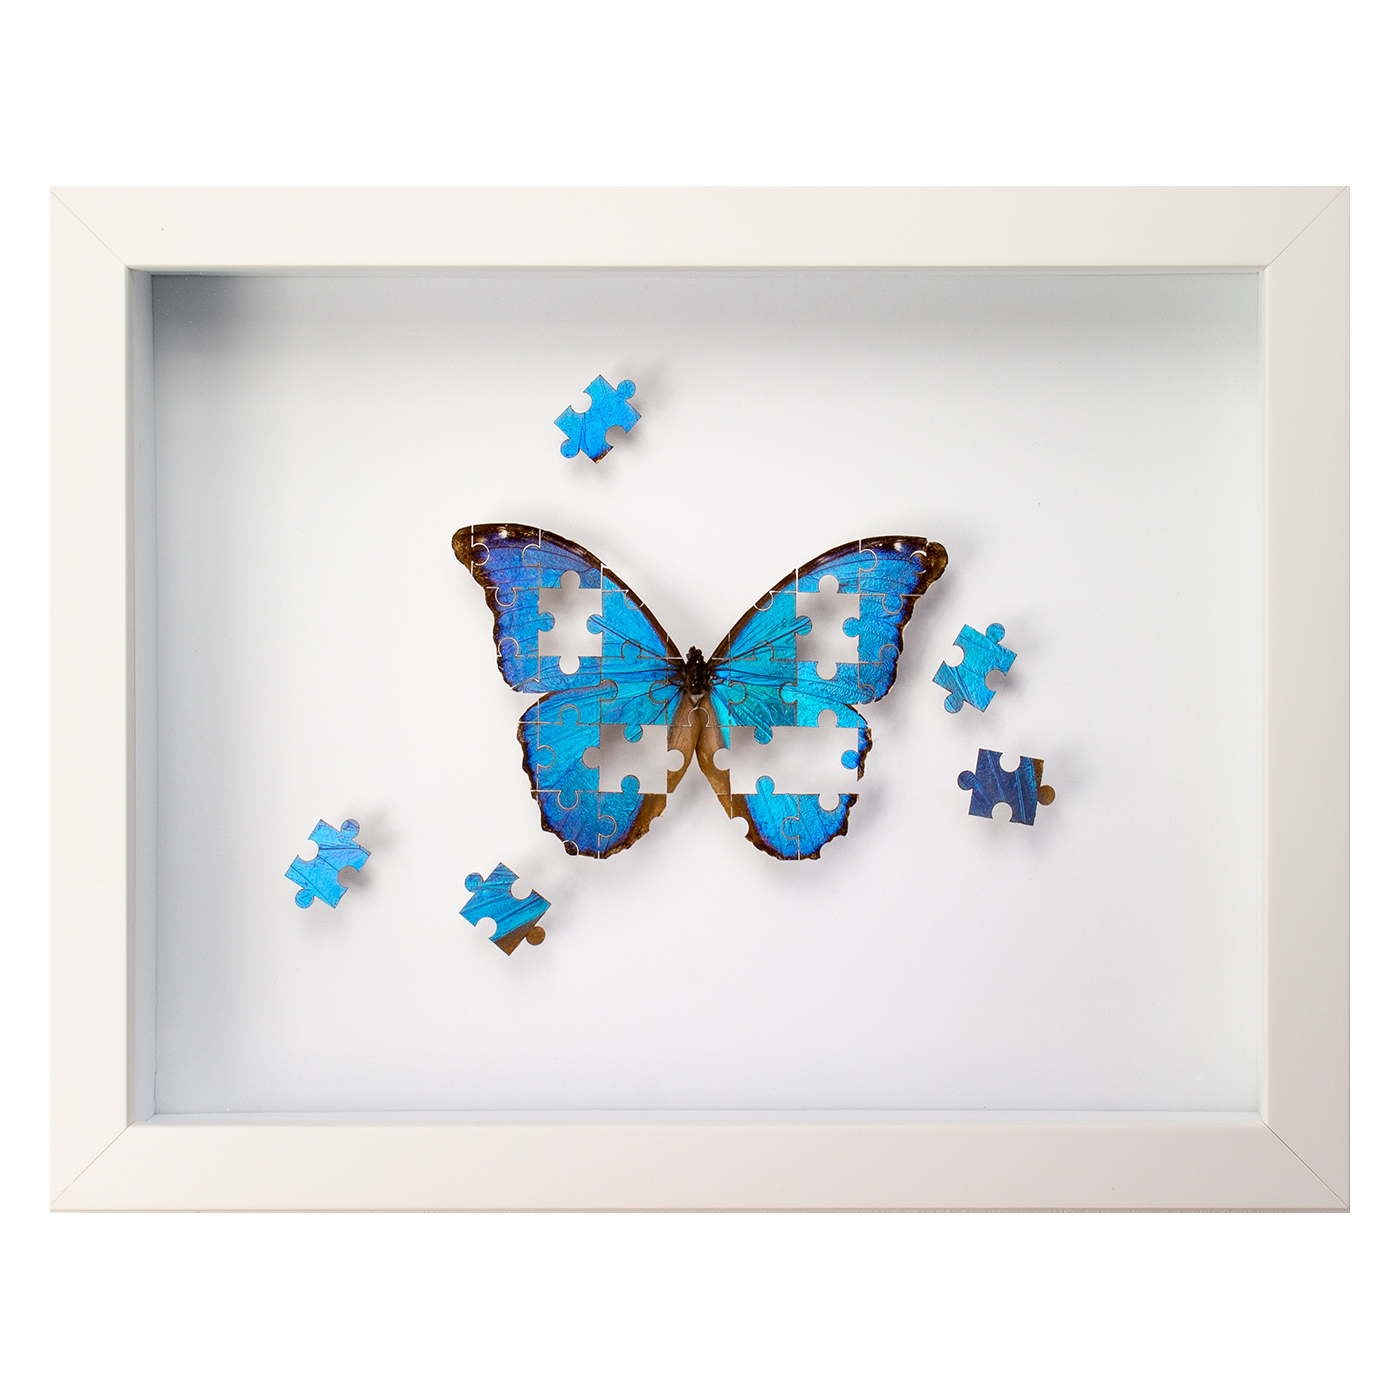 The Puzzle is a framed artwork by Fiona Parkinson, featuring a Blue Morpho cut into jigsaw puzzle